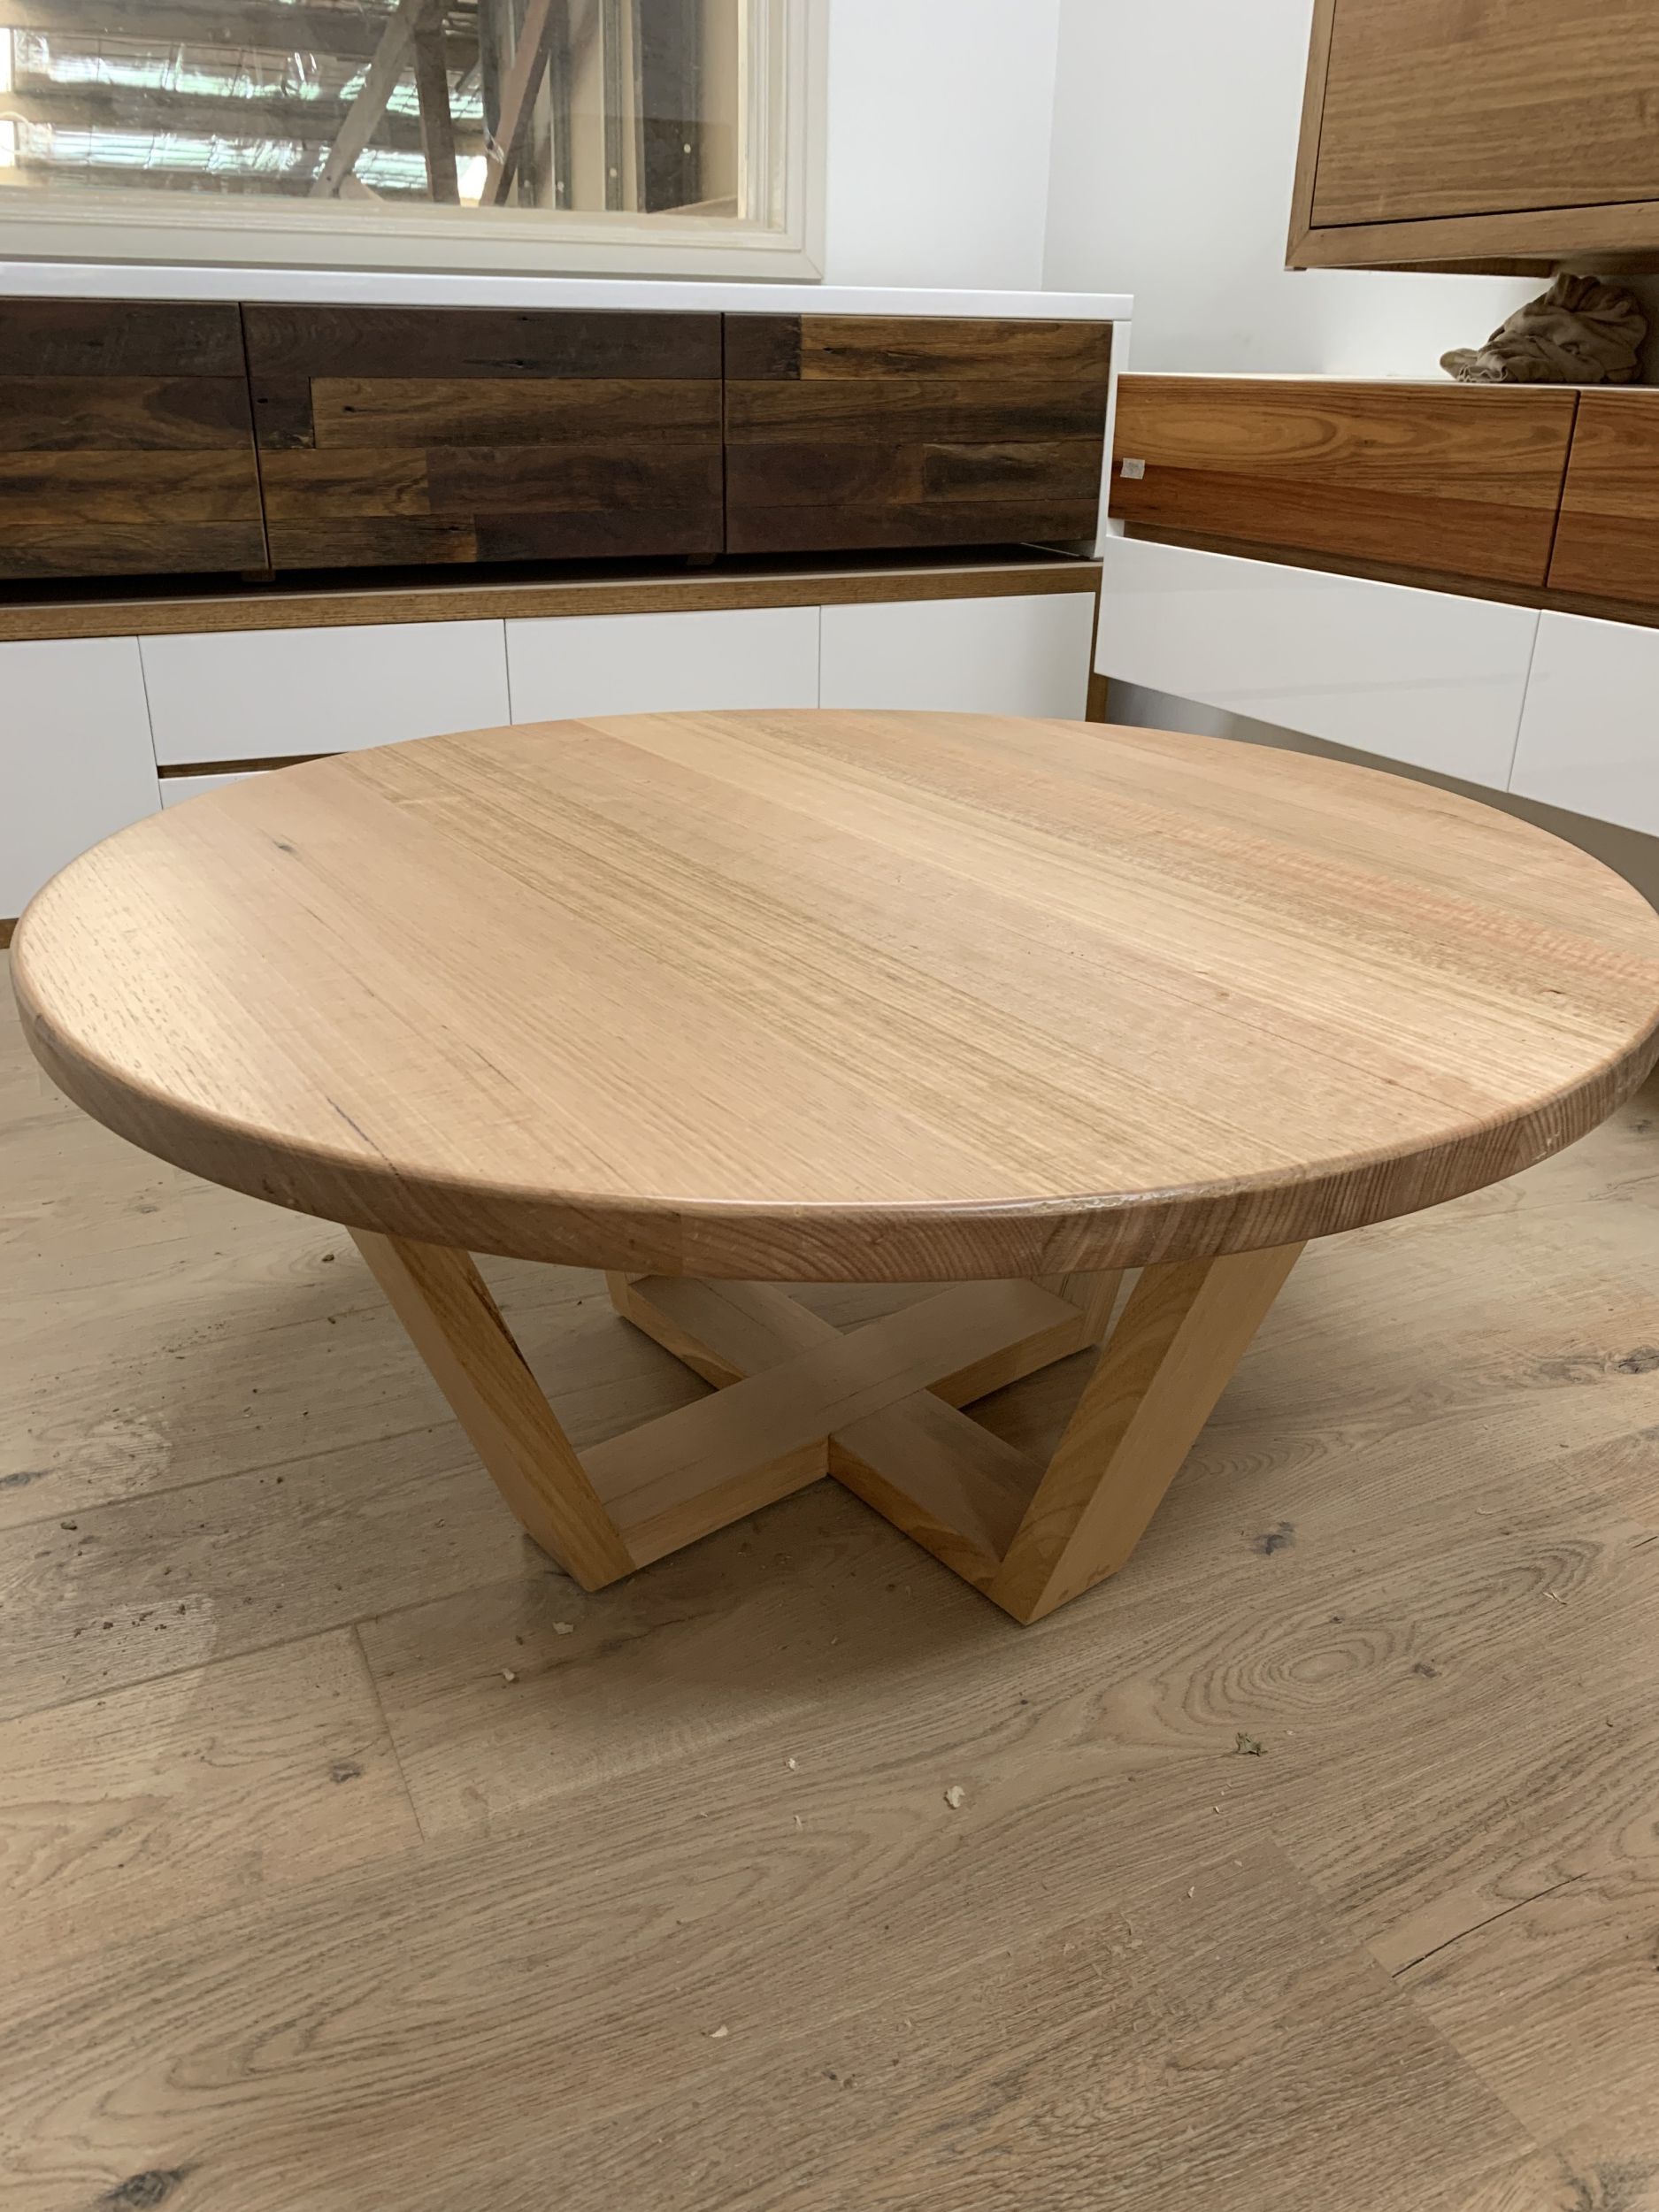 Tassie Oak Cross Round Coffee Table – Australian Made With 2020 Metal Legs And Oak Top Round Coffee Tables (Gallery 5 of 20)